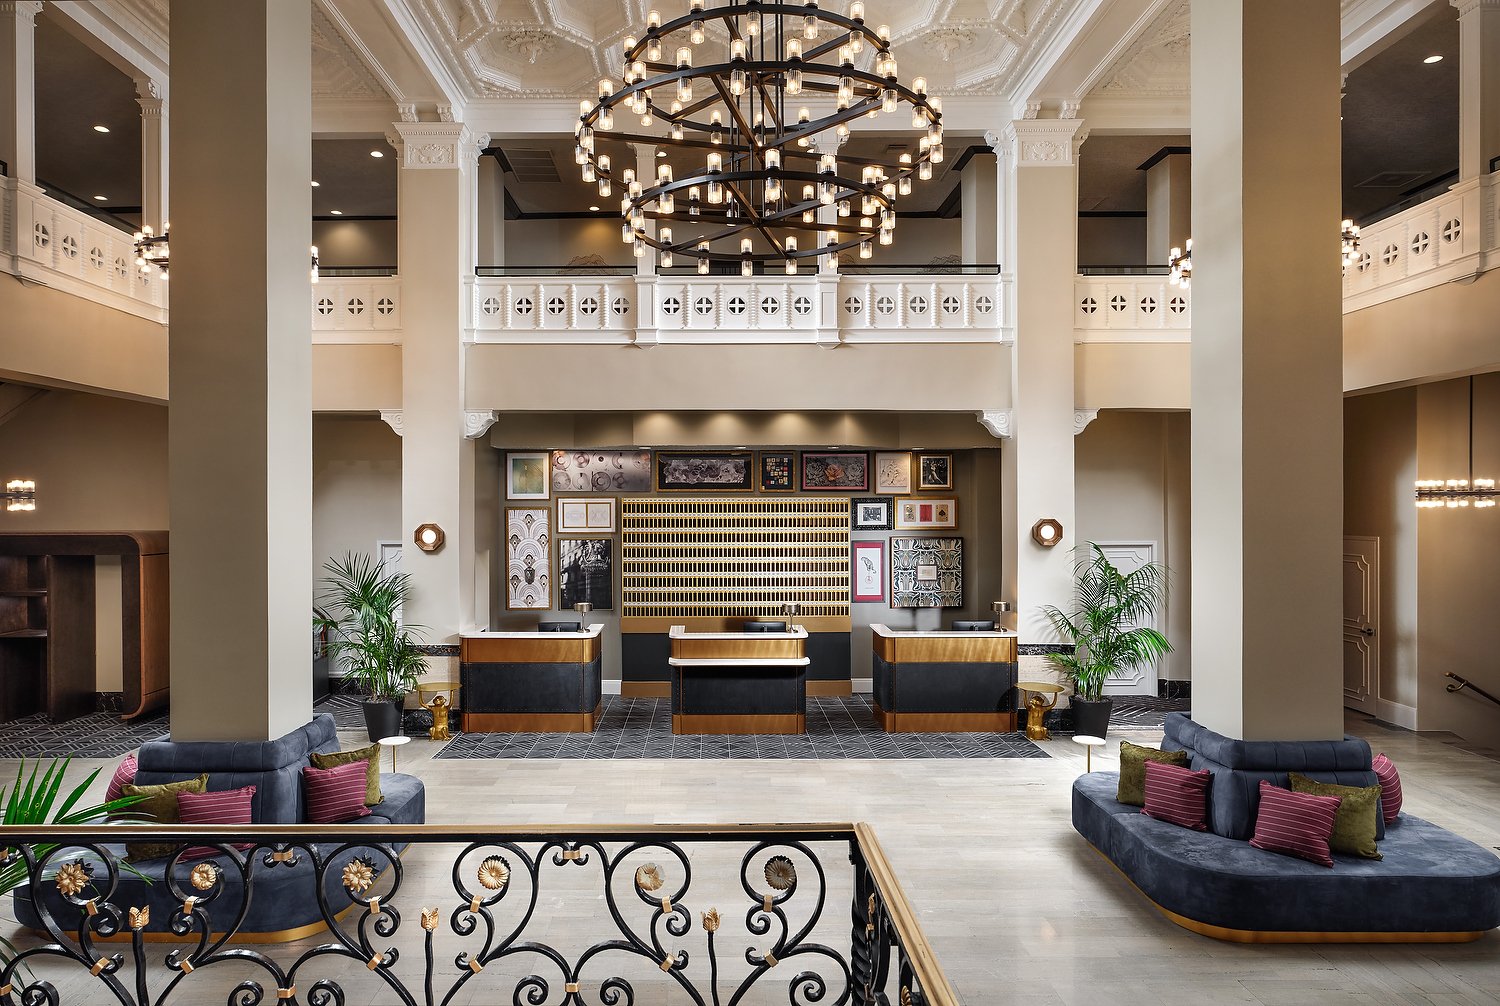 Hotel Flor’s The Dan Awarded Florida Restaurant & Lodging “People’s Choice”